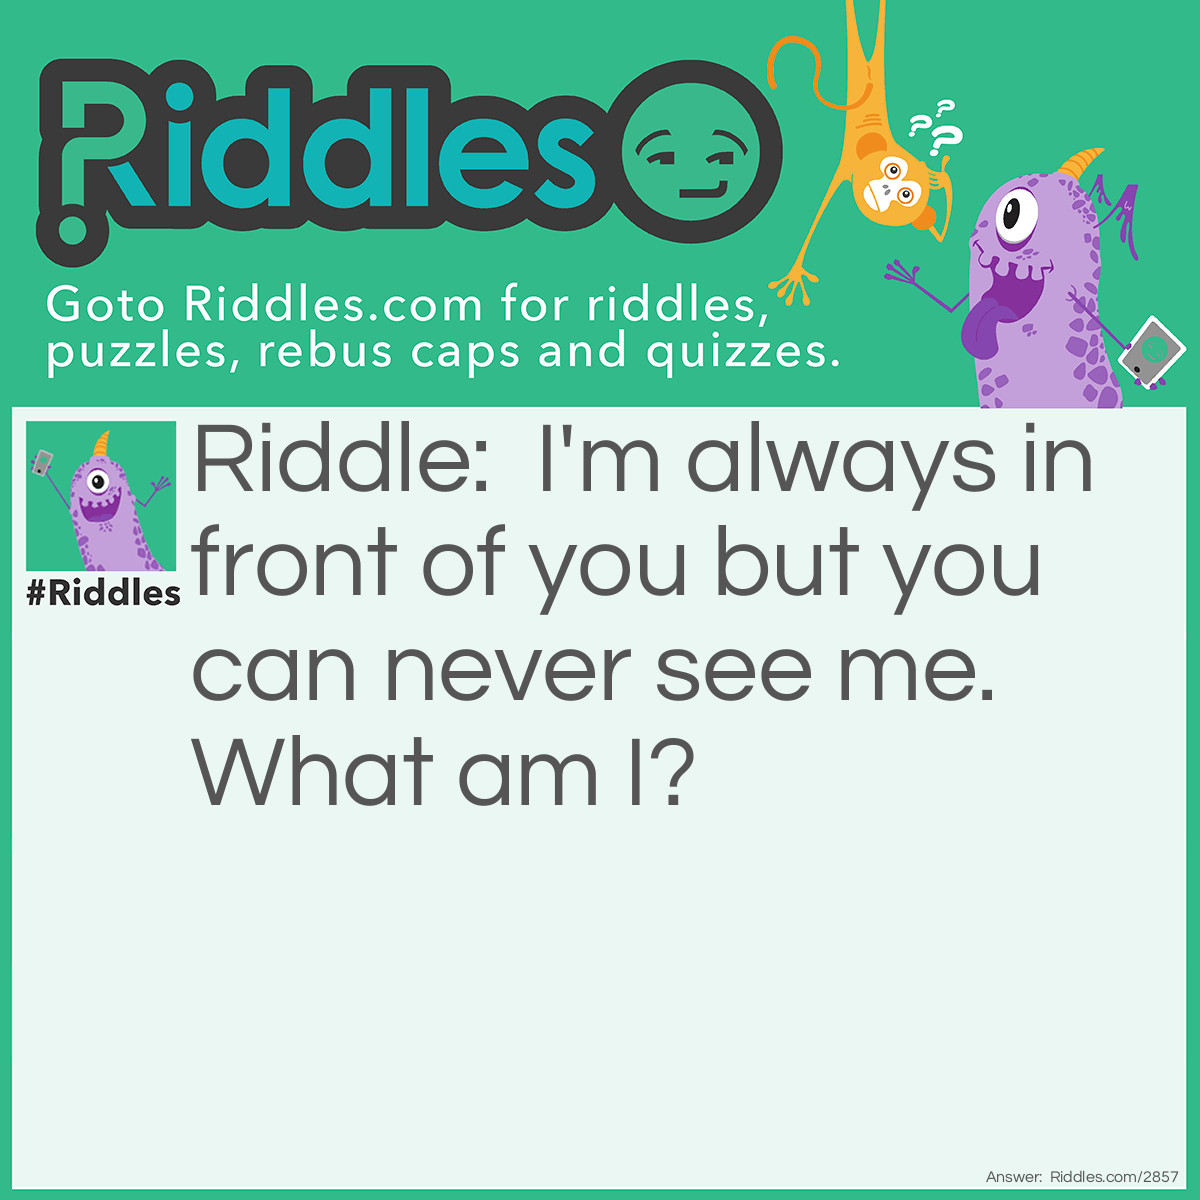 Riddle: I'm always in front of you but you can never see me. What am I? Answer: The future.